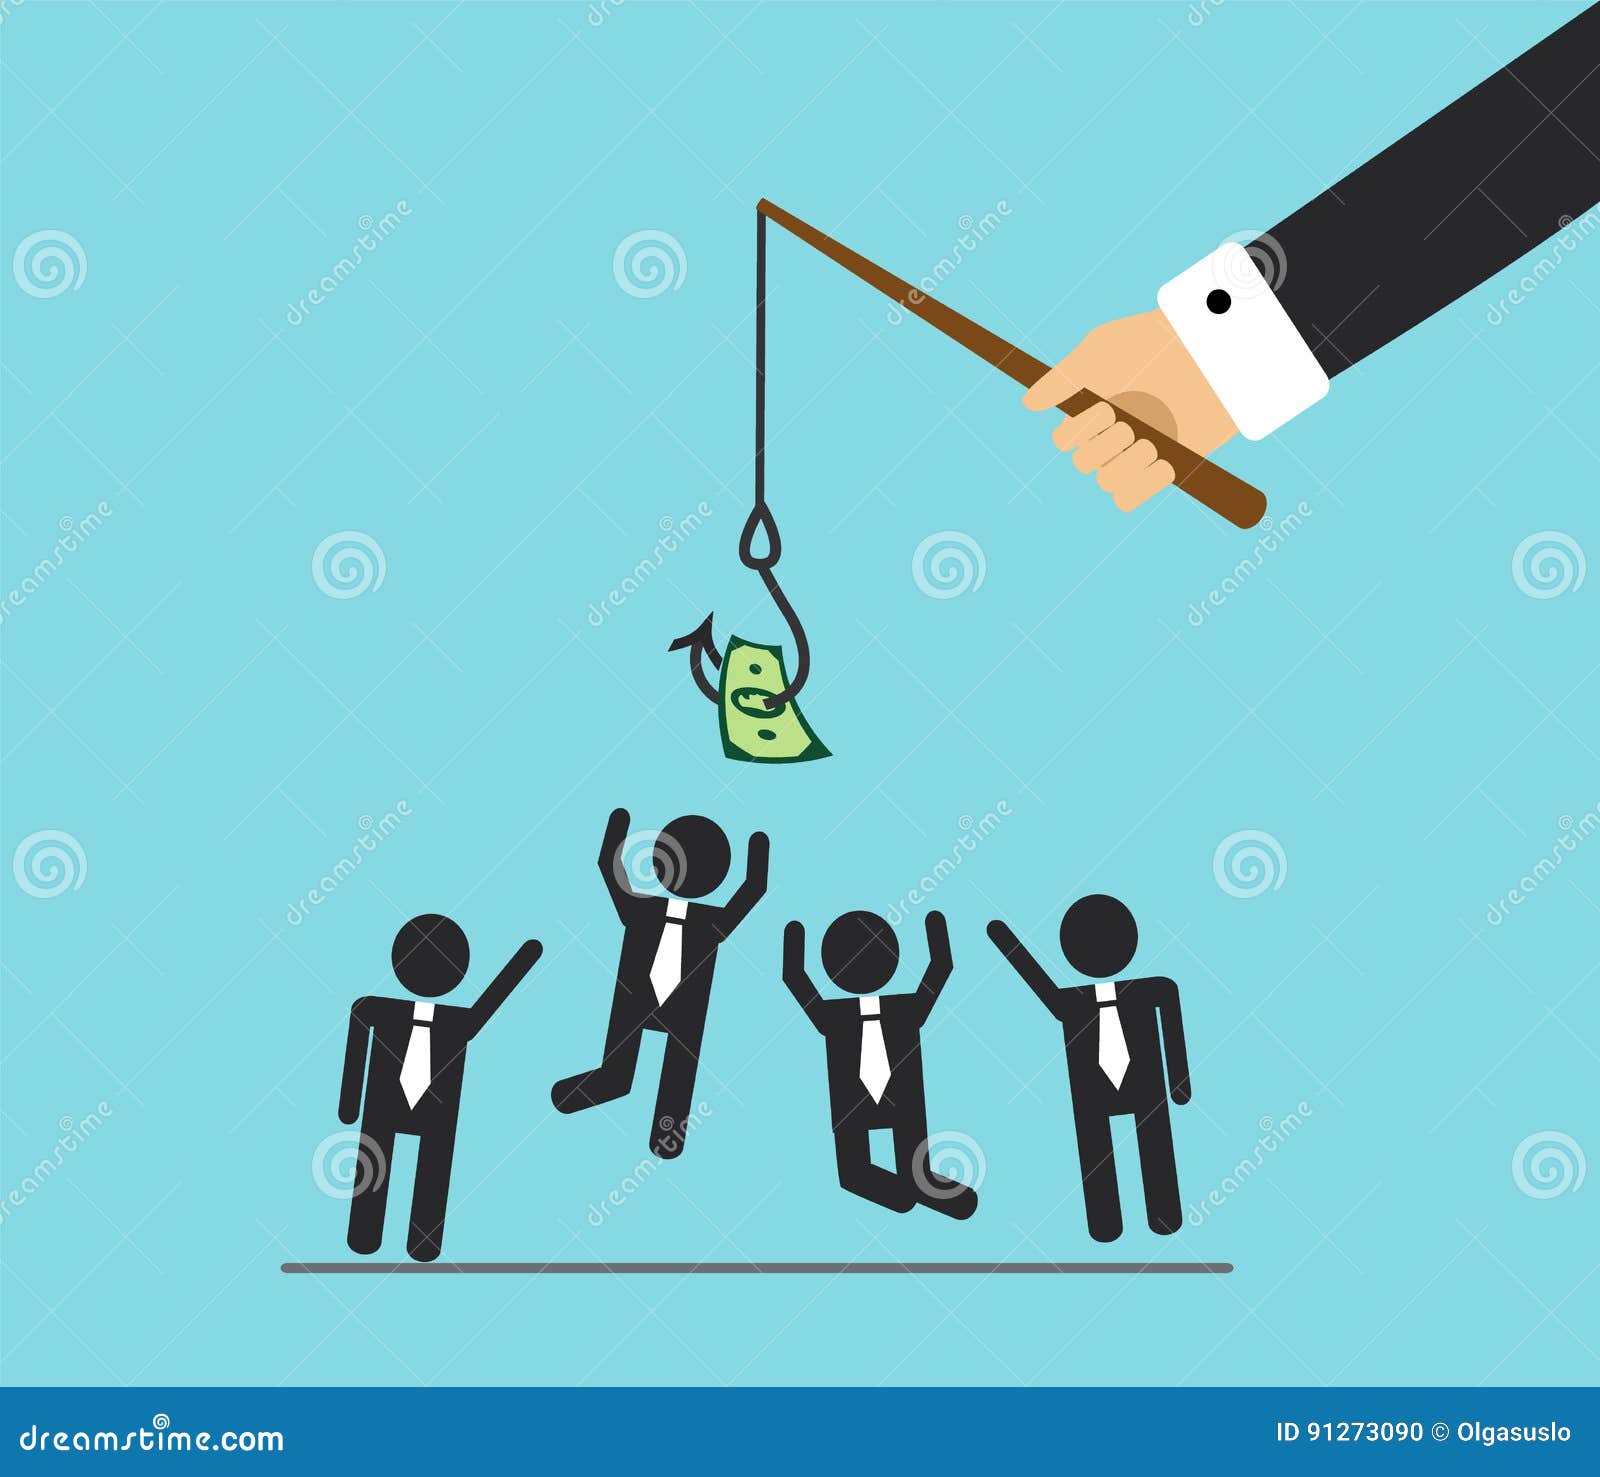 https://thumbs.dreamstime.com/z/money-competition-office-hand-will-bite-fishing-rod-hook-hangs-workers-jump-want-to-do-work-get-91273090.jpg